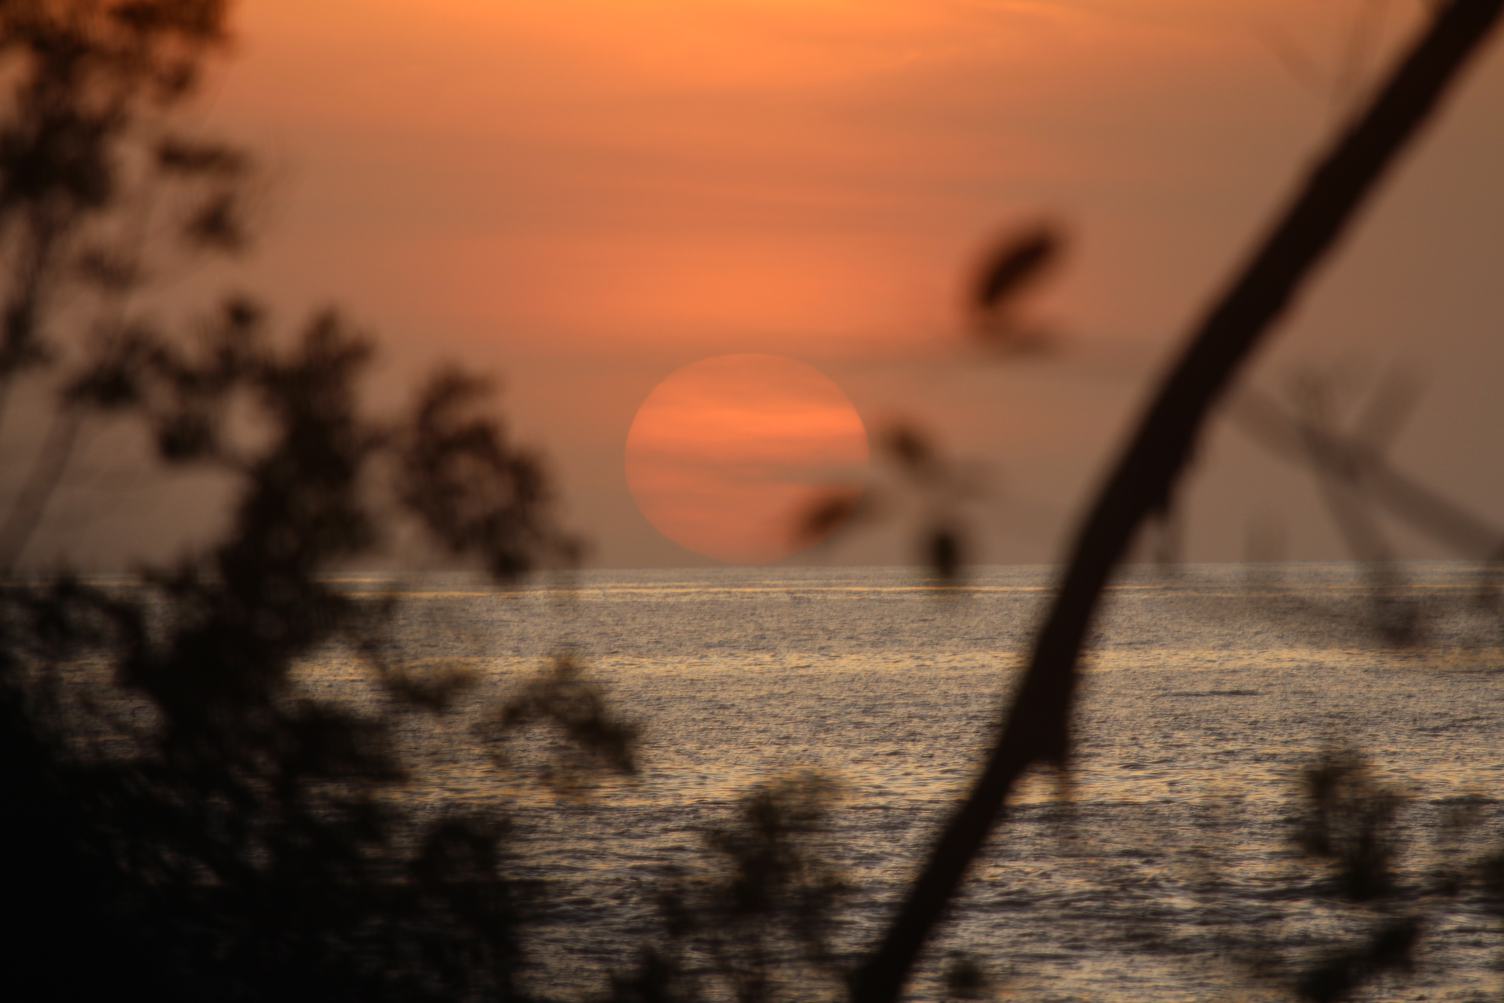 Sea at Sunset from Behind the Trees